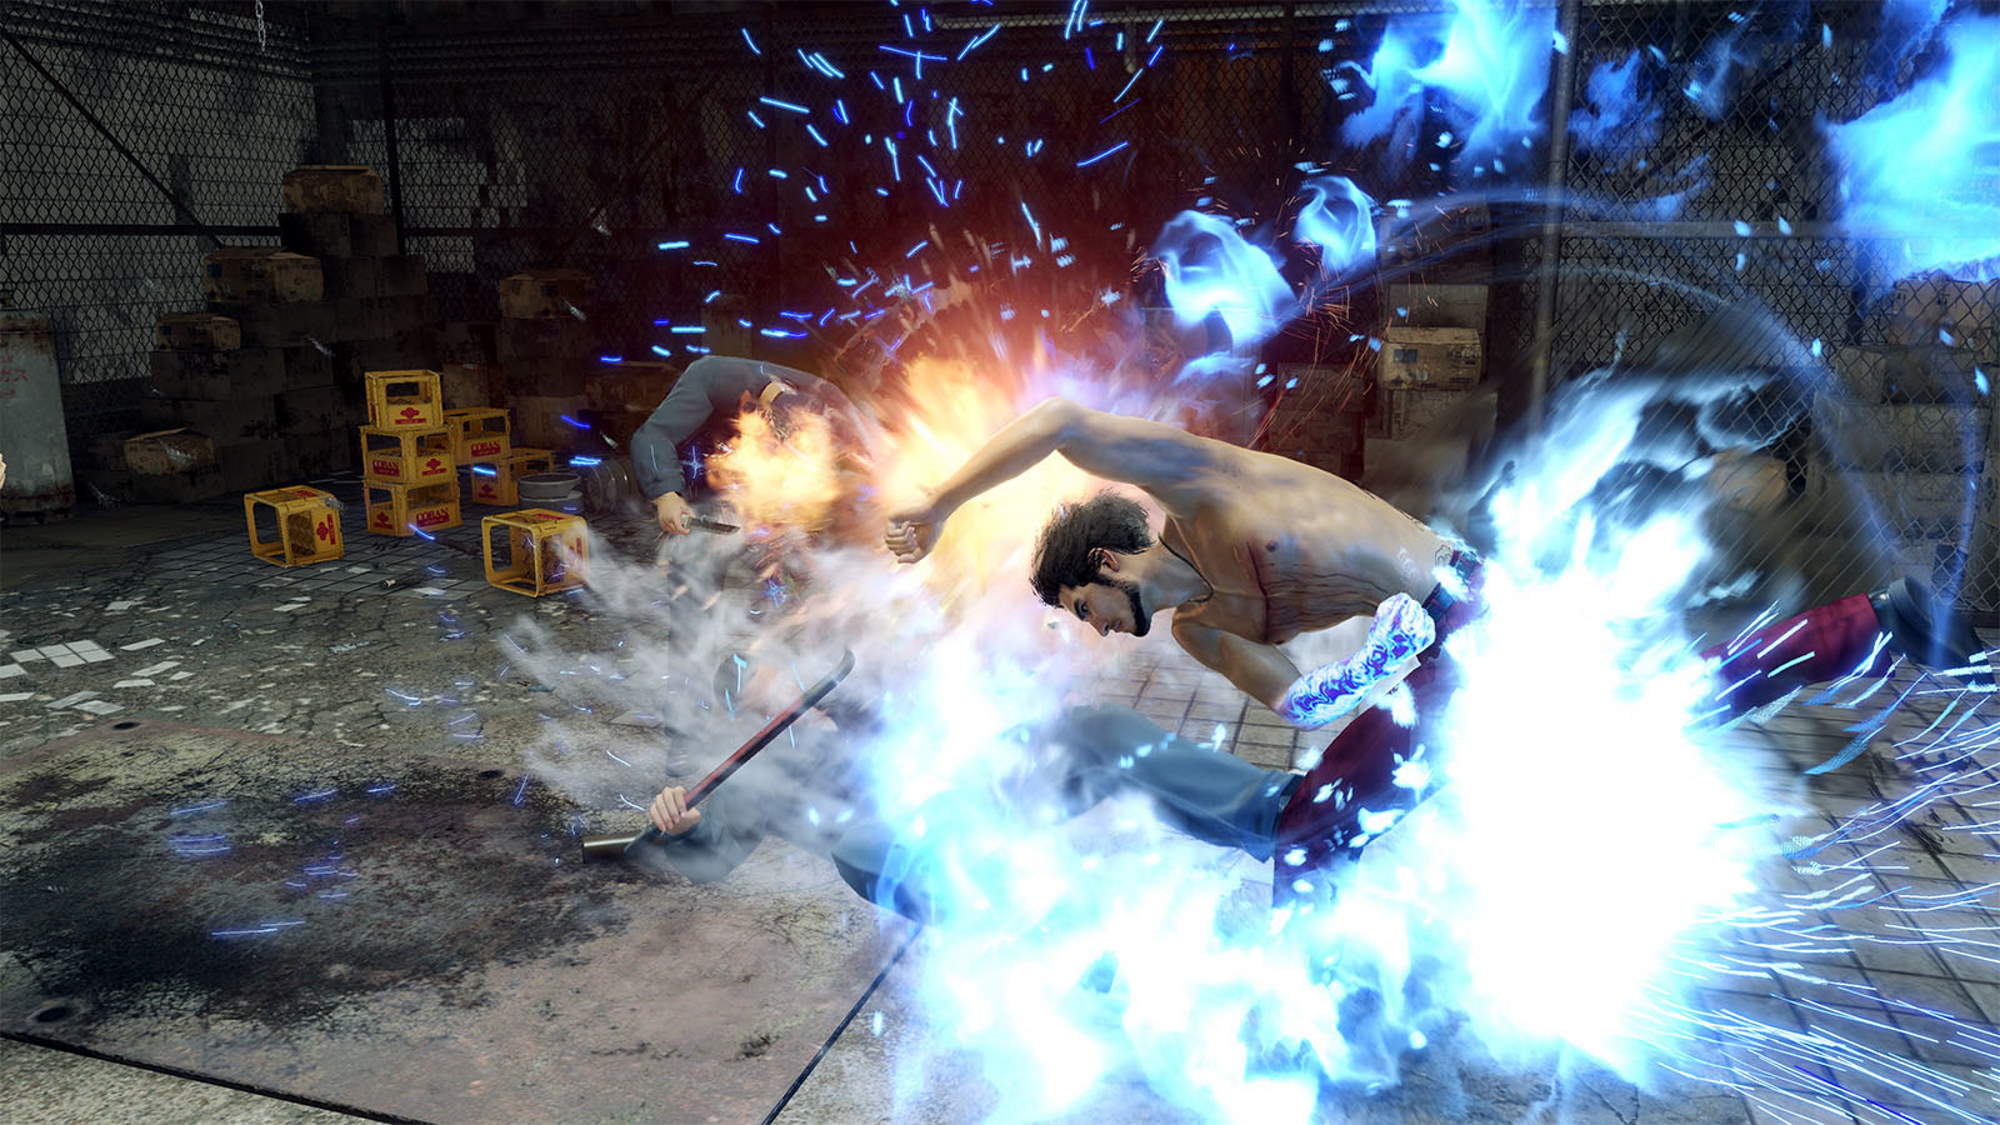 Ichiban surrounded by blue flames, punching an enemy.